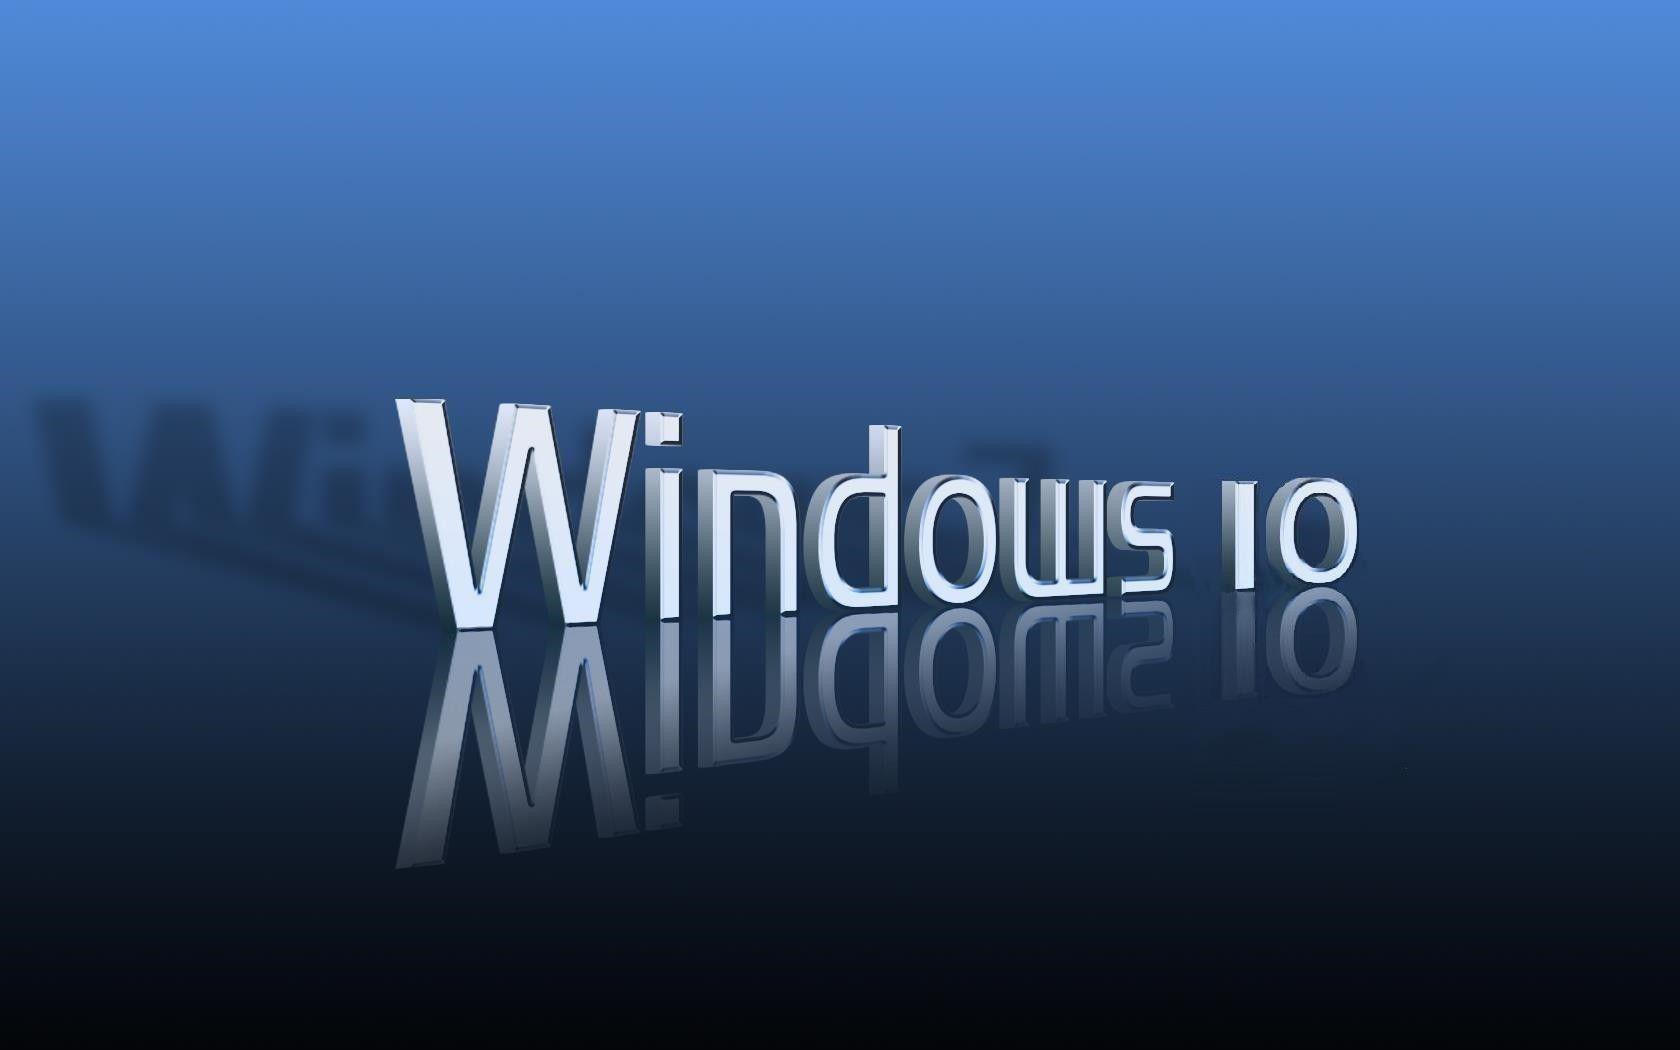 Windows 10, Microsoft, Operating System, Backgrounds wallpapers